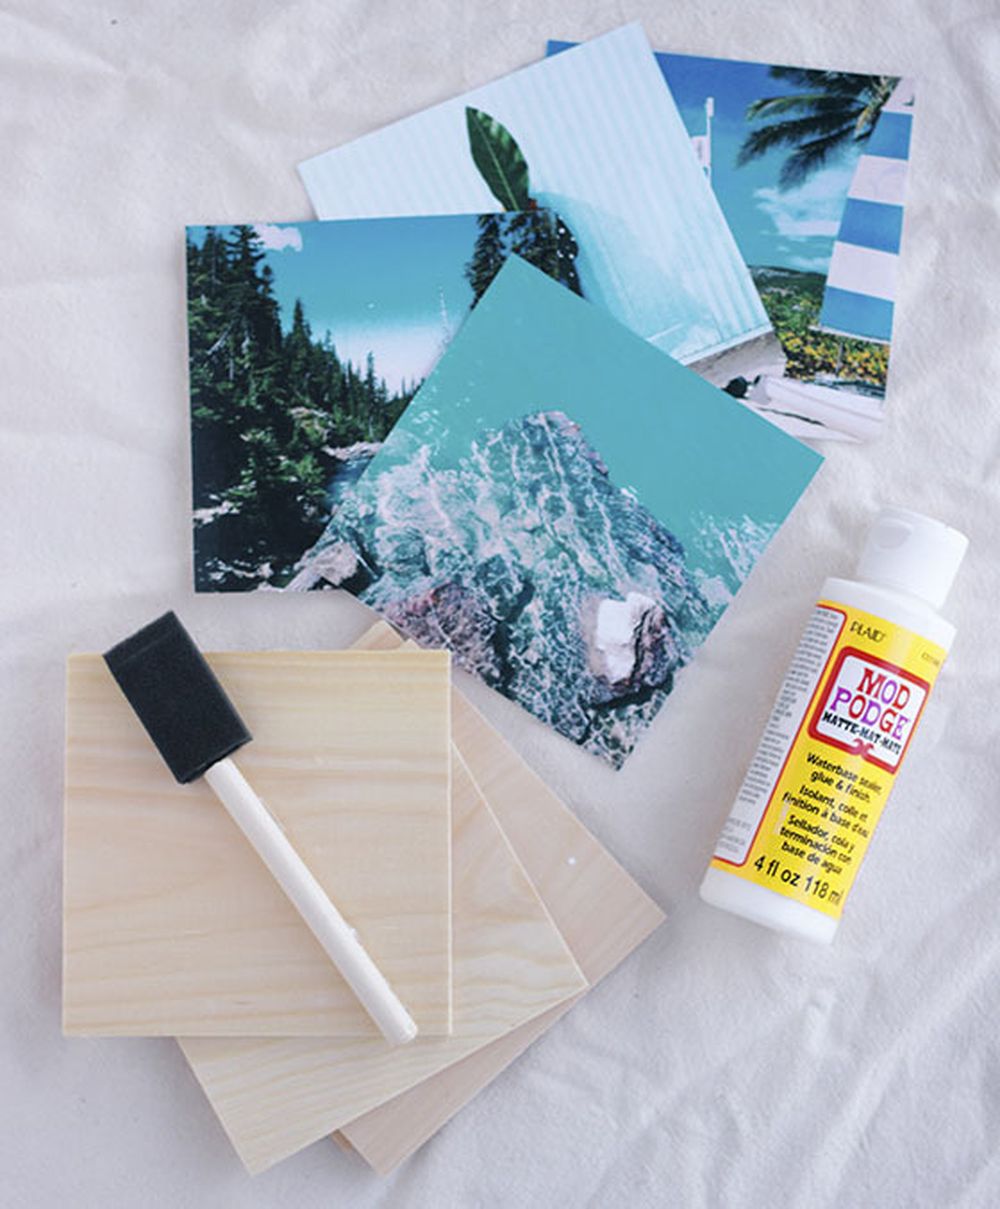 Diy coasters with your own photos valentine's day presents